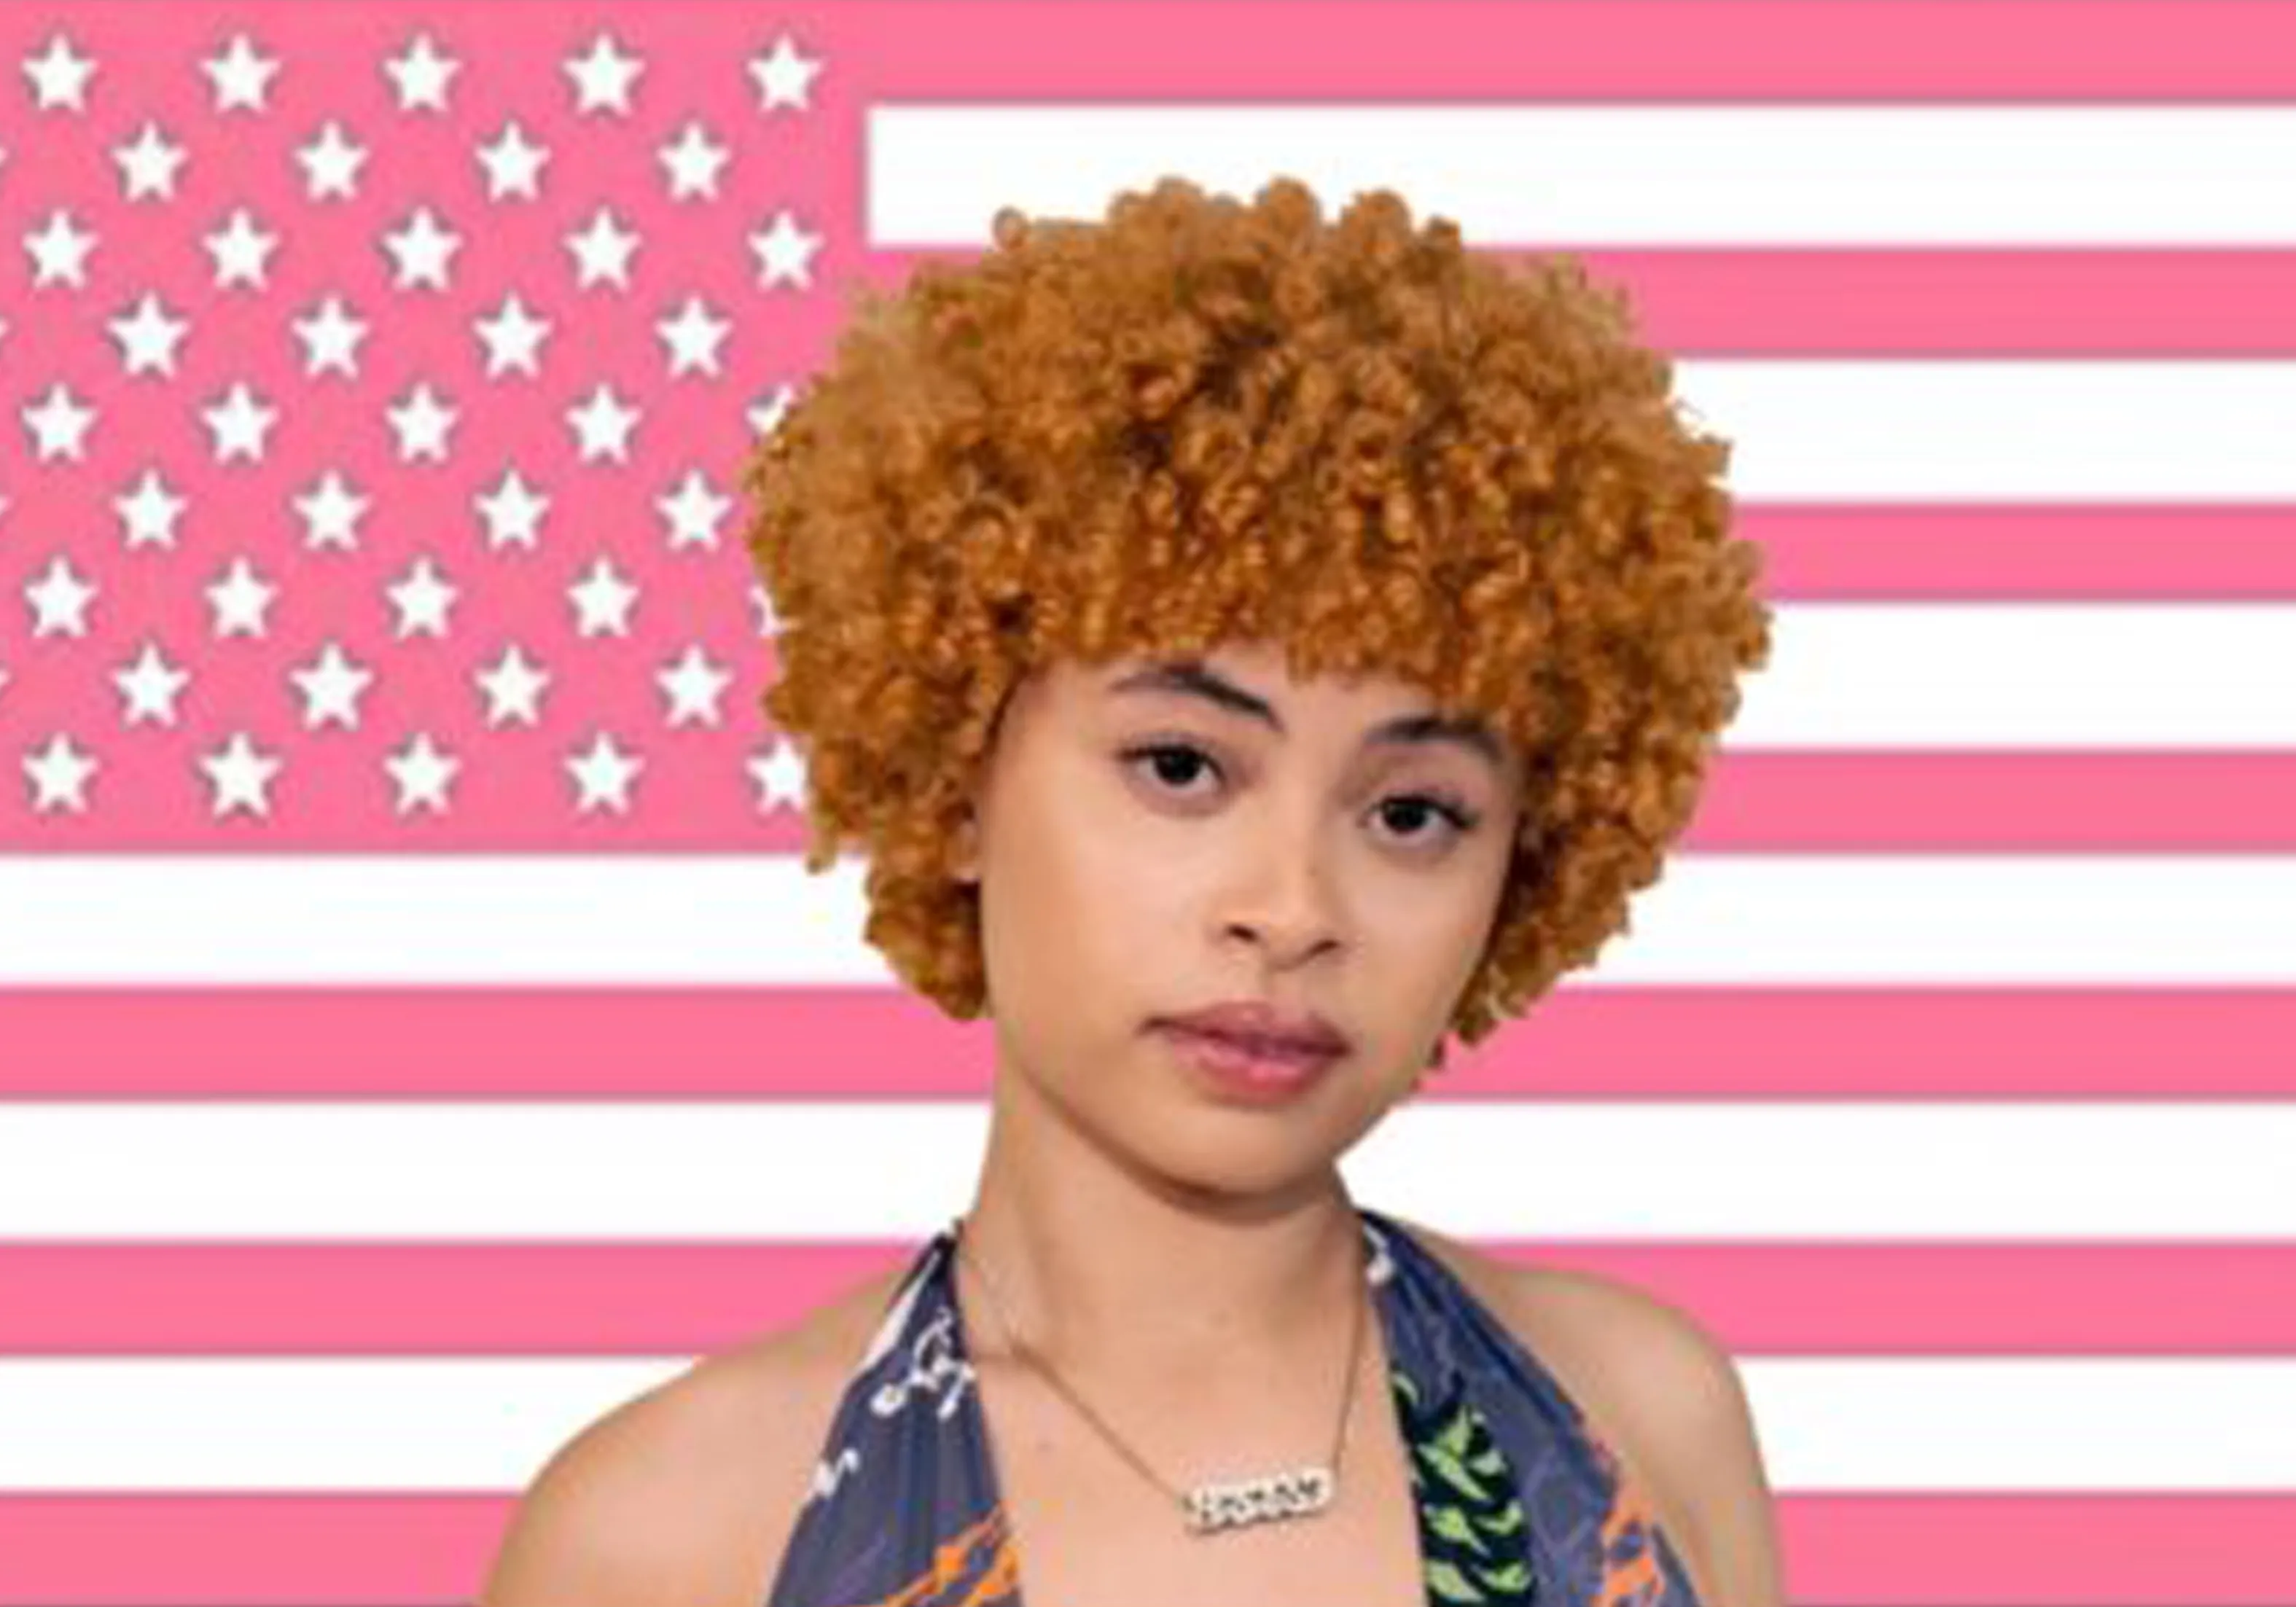 A girl with an afro hairstyle in front of the american flag - Ice Spice